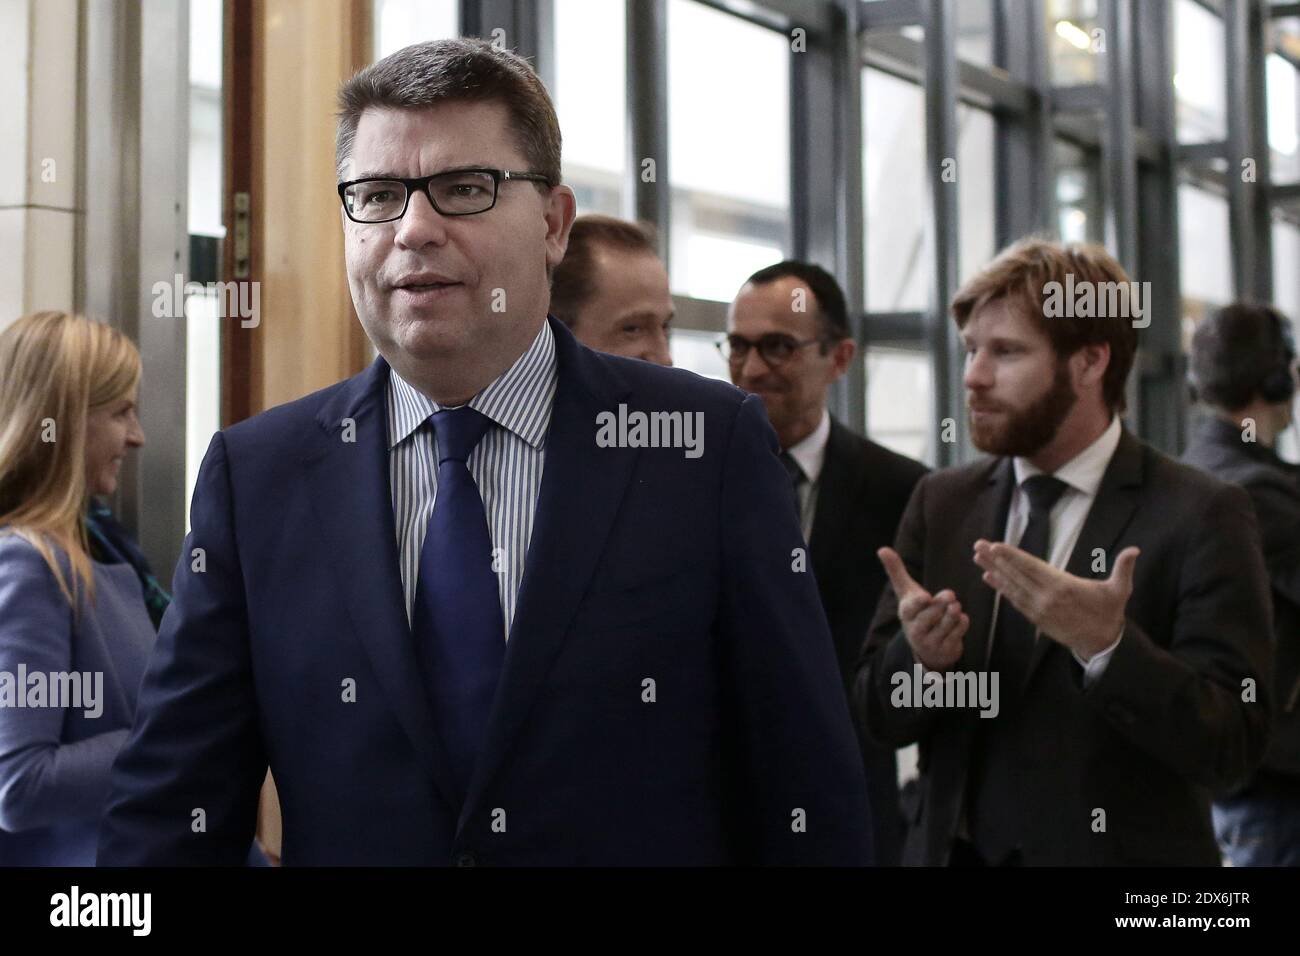 French Treasury general director Bruno Bezard attends as Outgoing French Economy Minister Arnaud Montebourg and his newly appointed successor Emmanuel Macron, a 36-year-old ex-Rothschild banker and architect of the president's economic policy, during a handover cermony in Paris, France on August 27, 2014 at the Economy Ministry. Photo by Stephane Lemouton/ABACAPRESS.COM Stock Photo